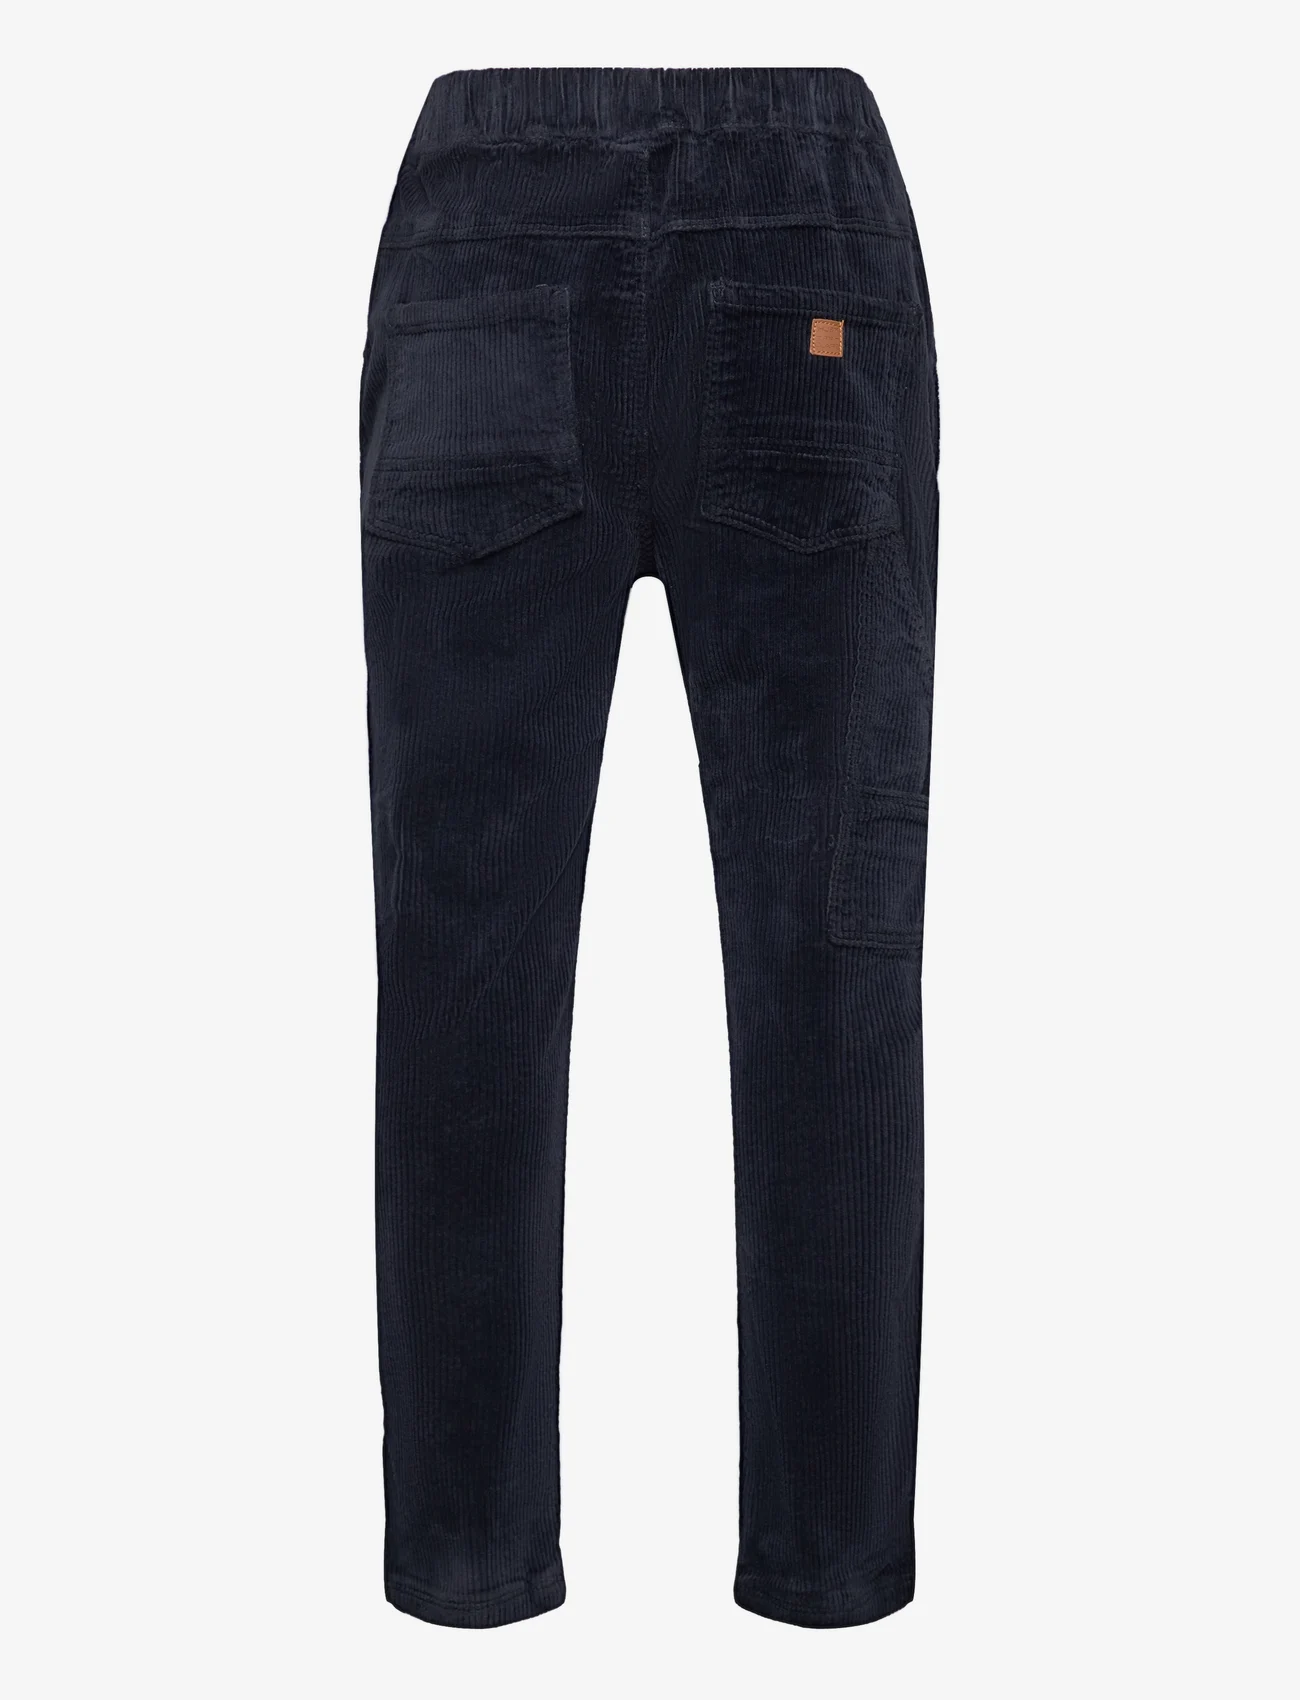 Hust & Claire - Thore - Trousers - joggebukser - blue night - 1